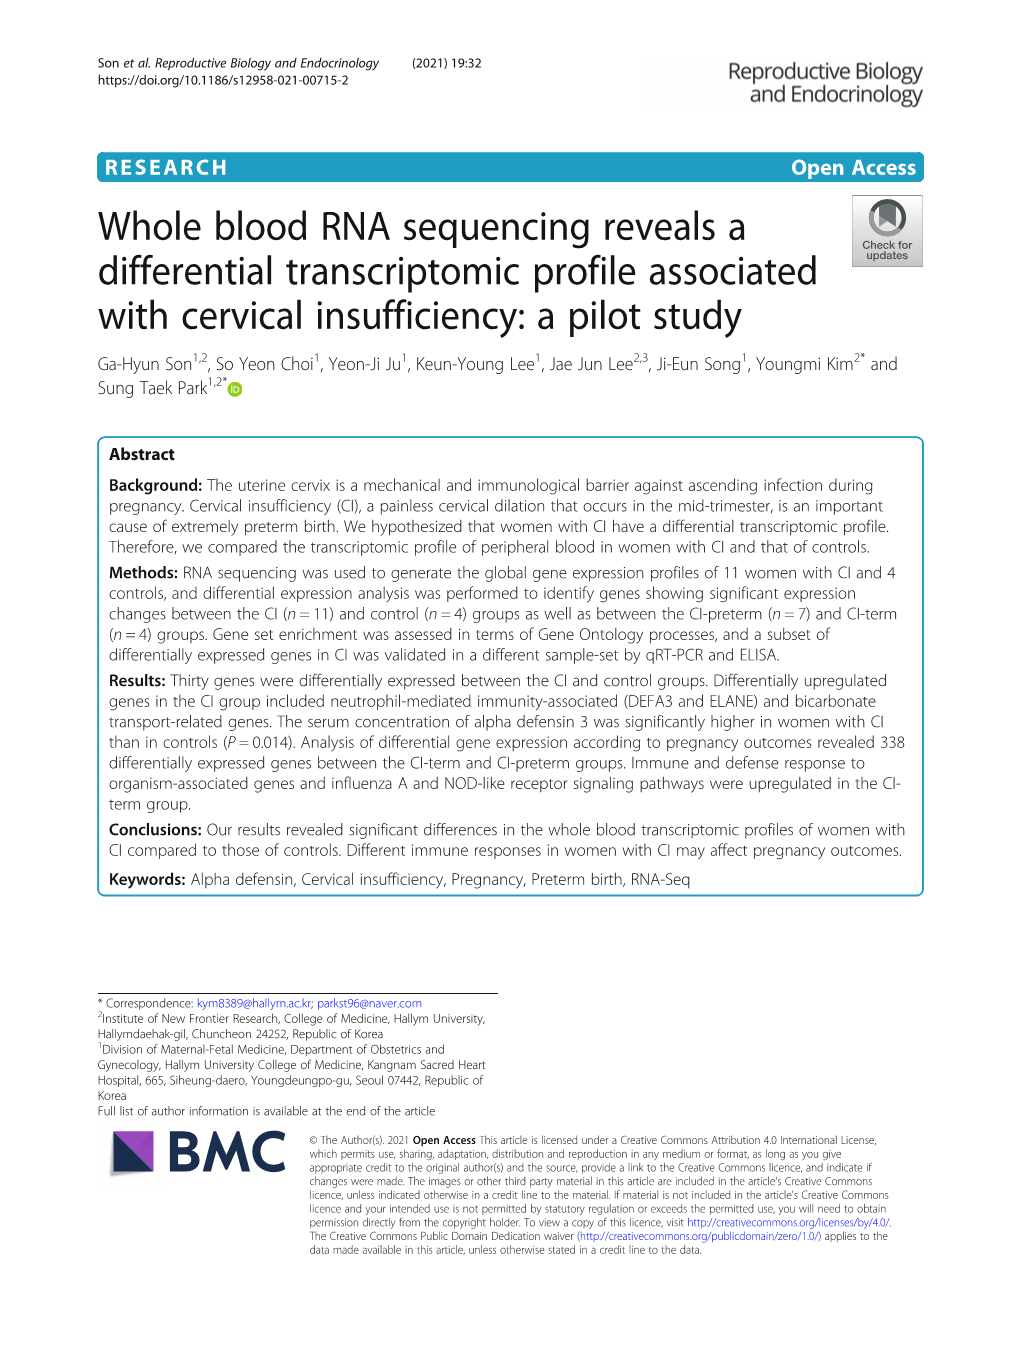 Whole Blood RNA Sequencing Reveals a Differential Transcriptomic Profile